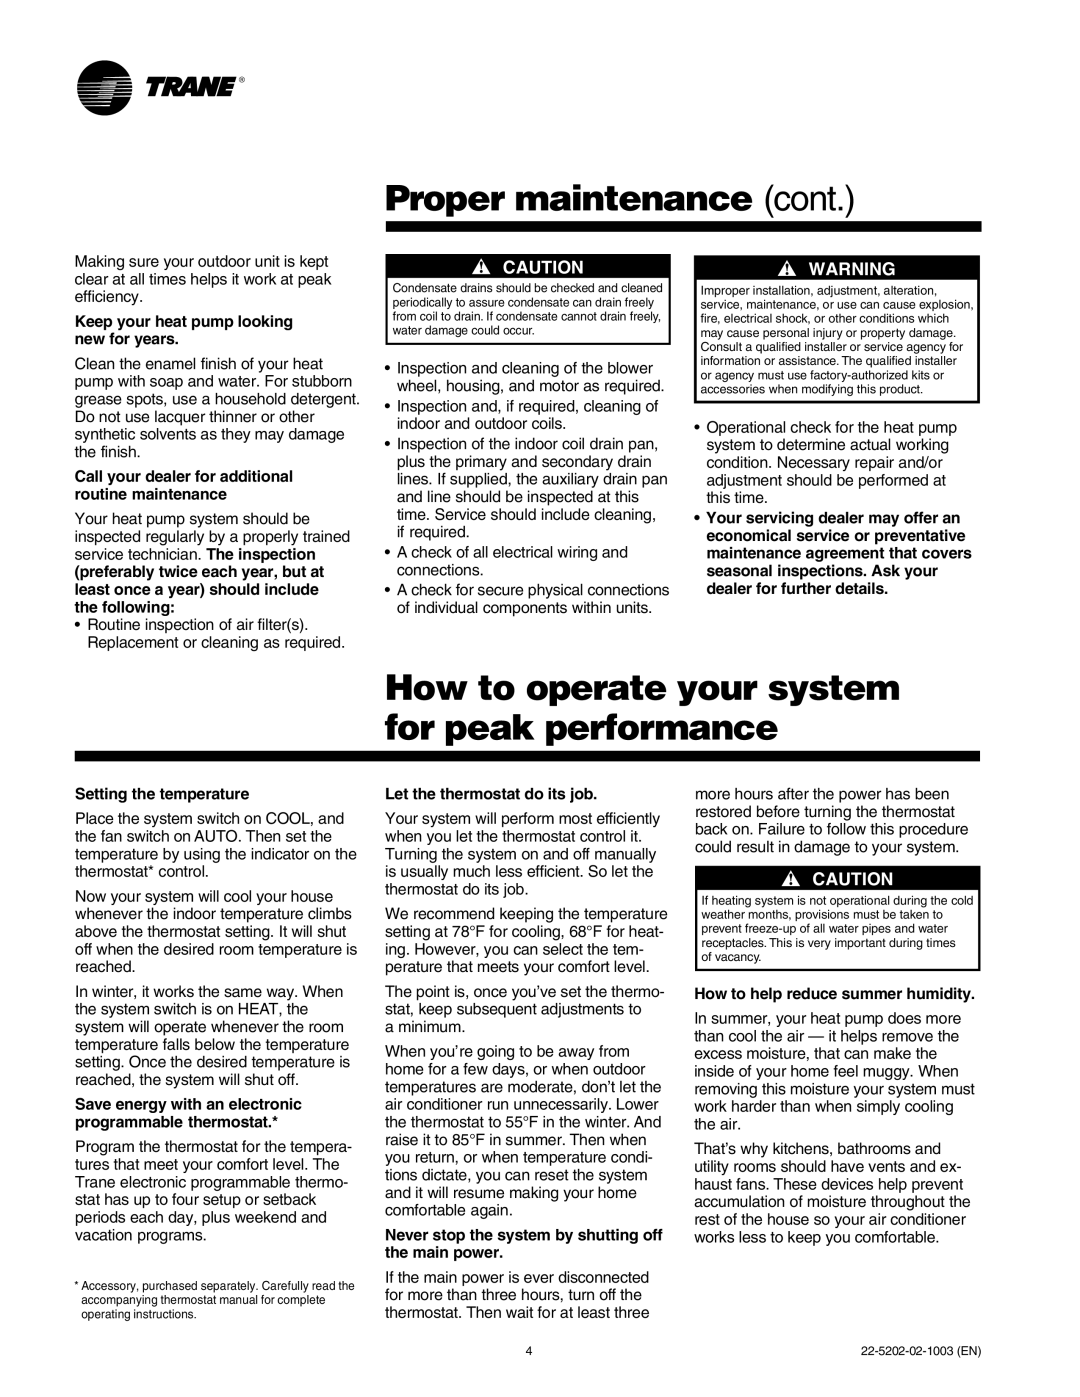 Trane 2TWB0-UM-2 manual Proper maintenance cont, How to operate your system for peak performance, Setting the temperature 